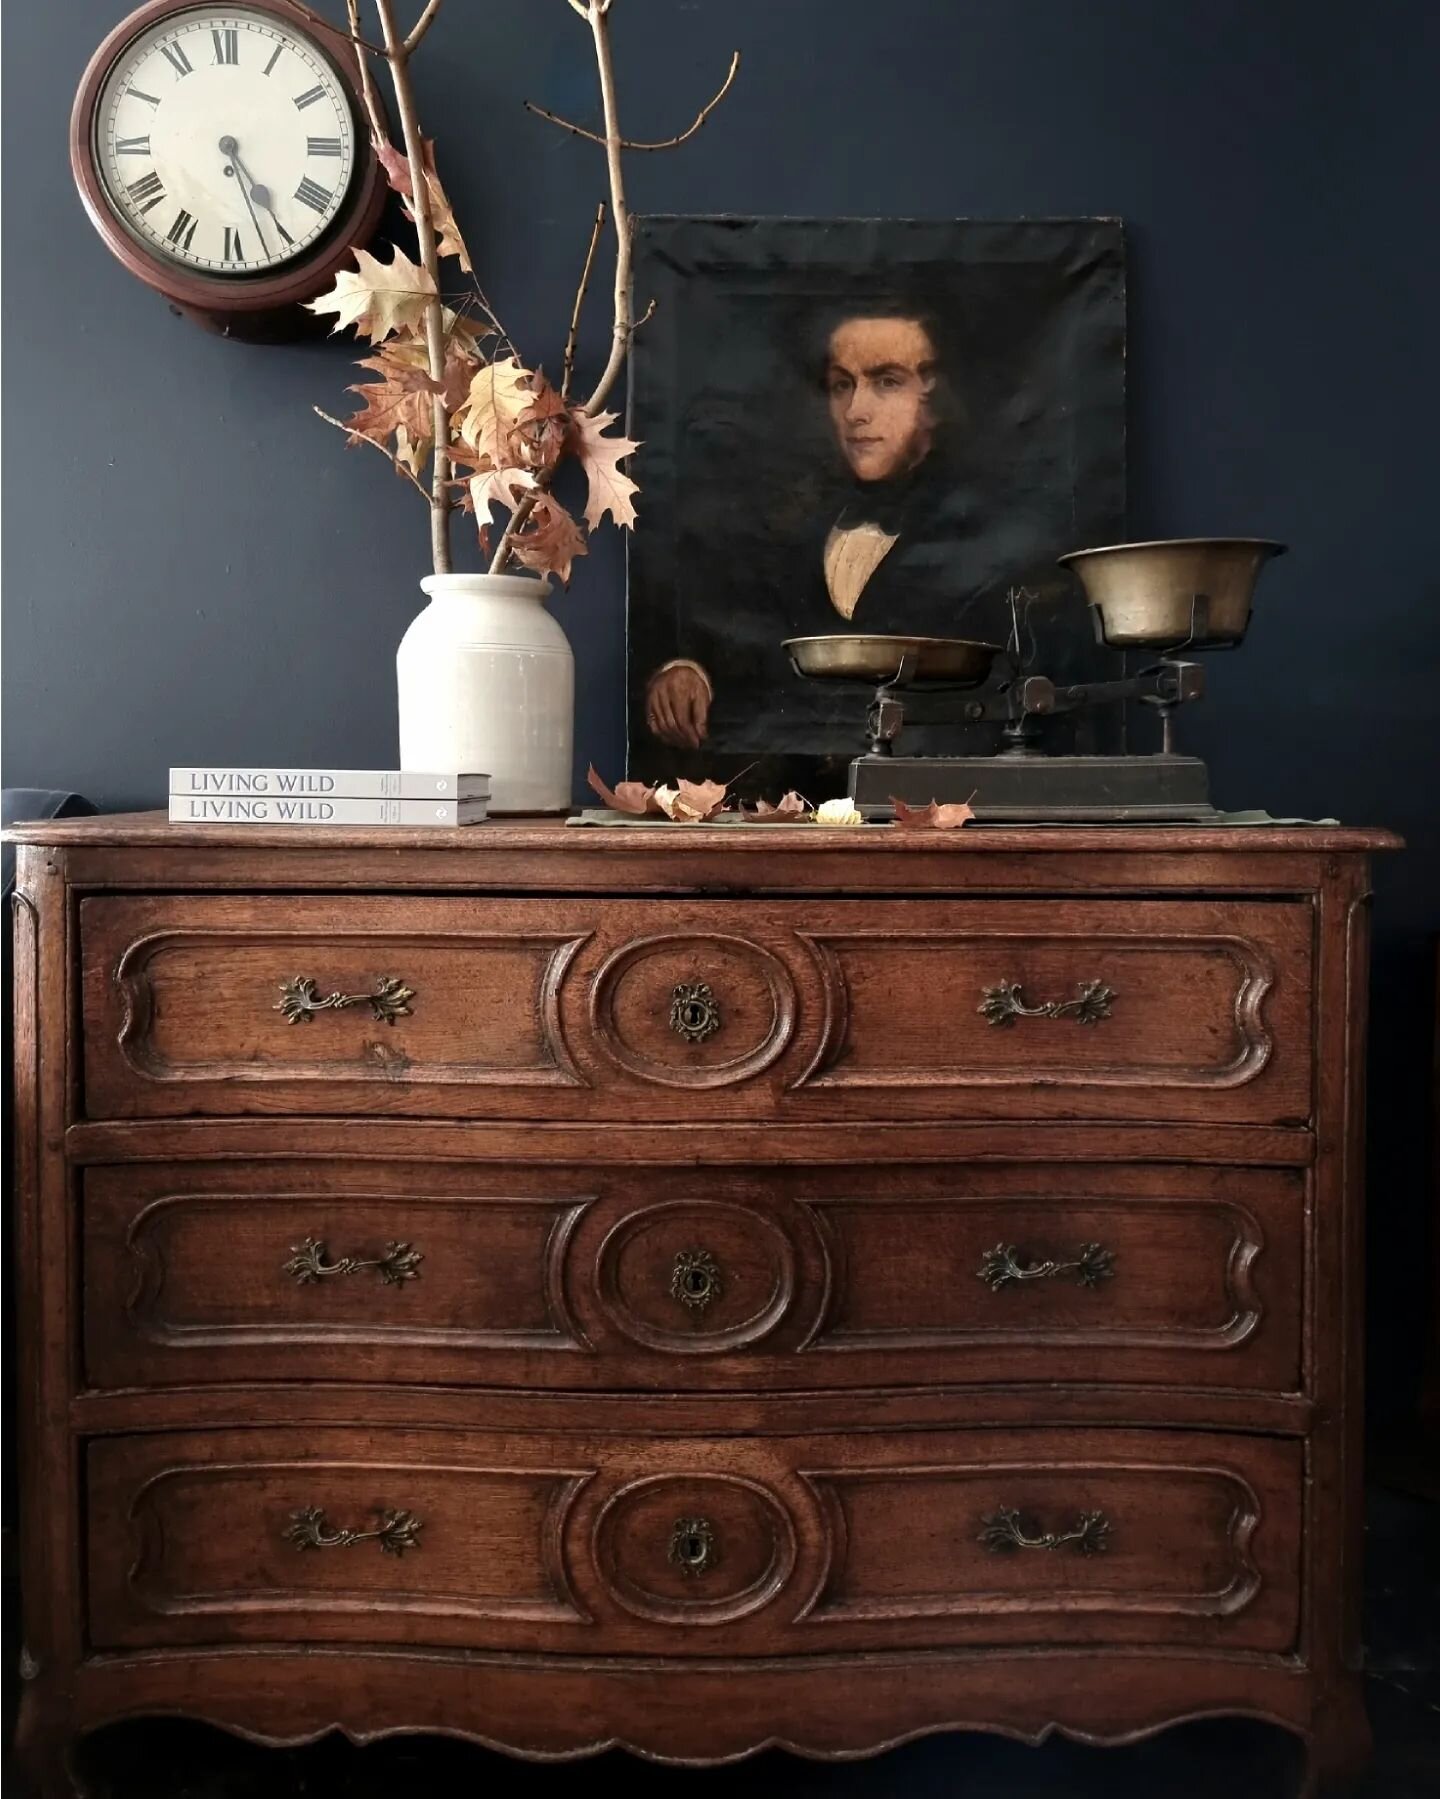 Stunning 18thC French oak commode with 3 drawers warming up the store on this winters day.

Both stores are O P E N Thursday to Sunday until 5pm, and the @kynetonfarmersmarket is on tomorrow morning (Saturday). 
So wrap up warmly and come for a drive